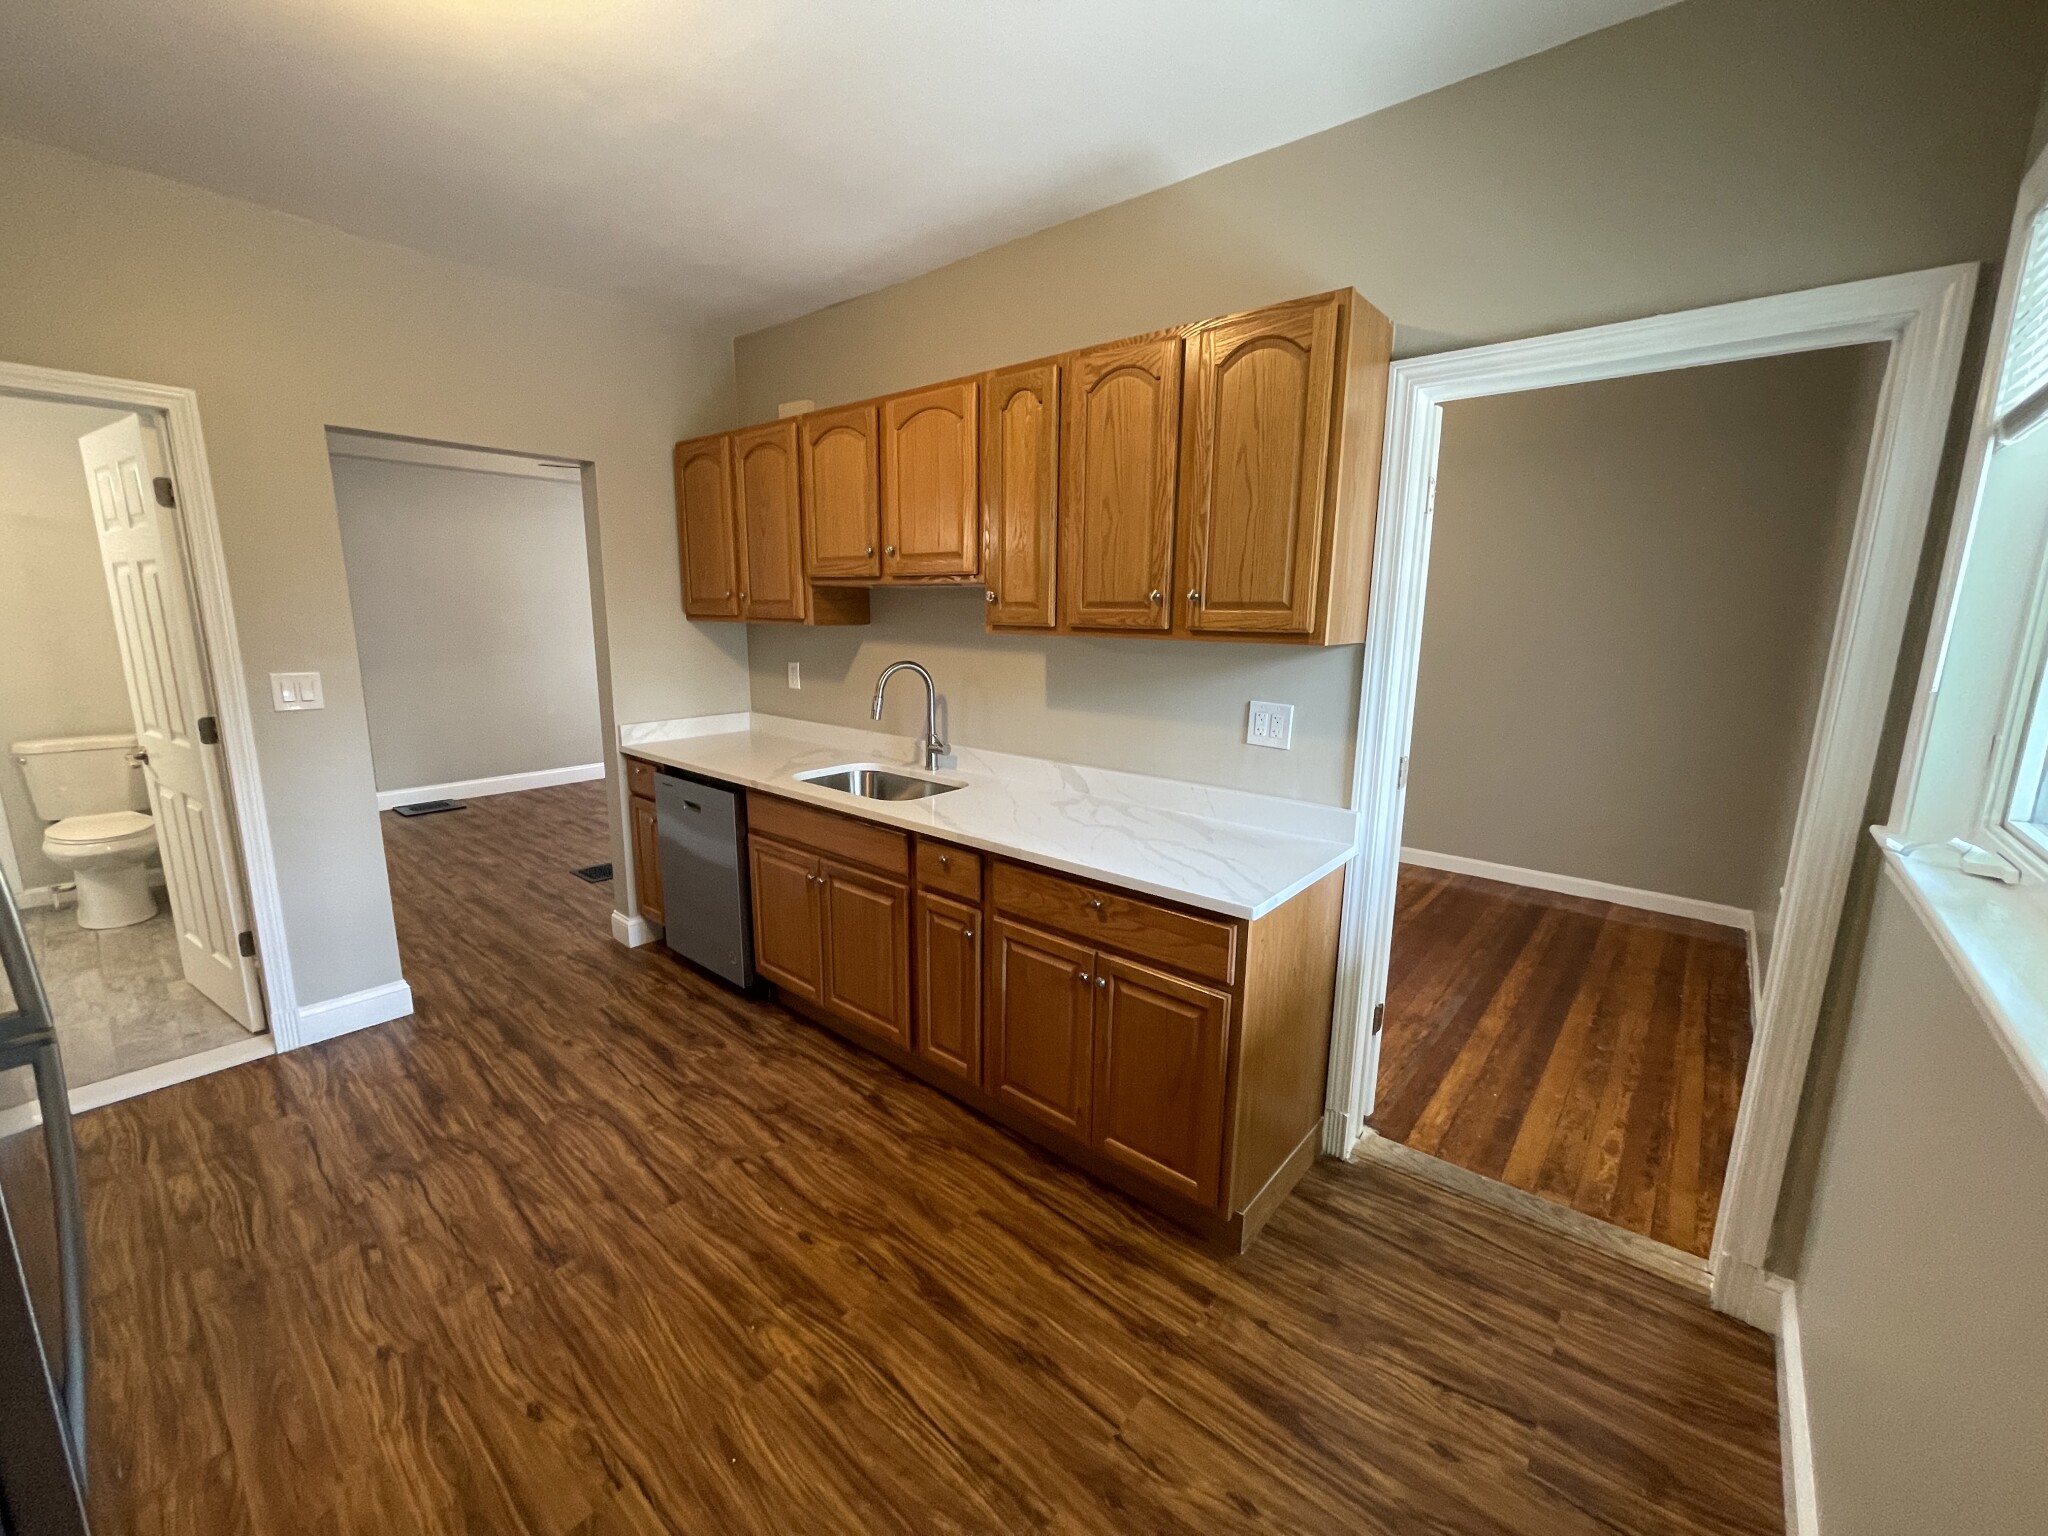 Photos of apartment on Woods Ave.,Somerville MA 02144